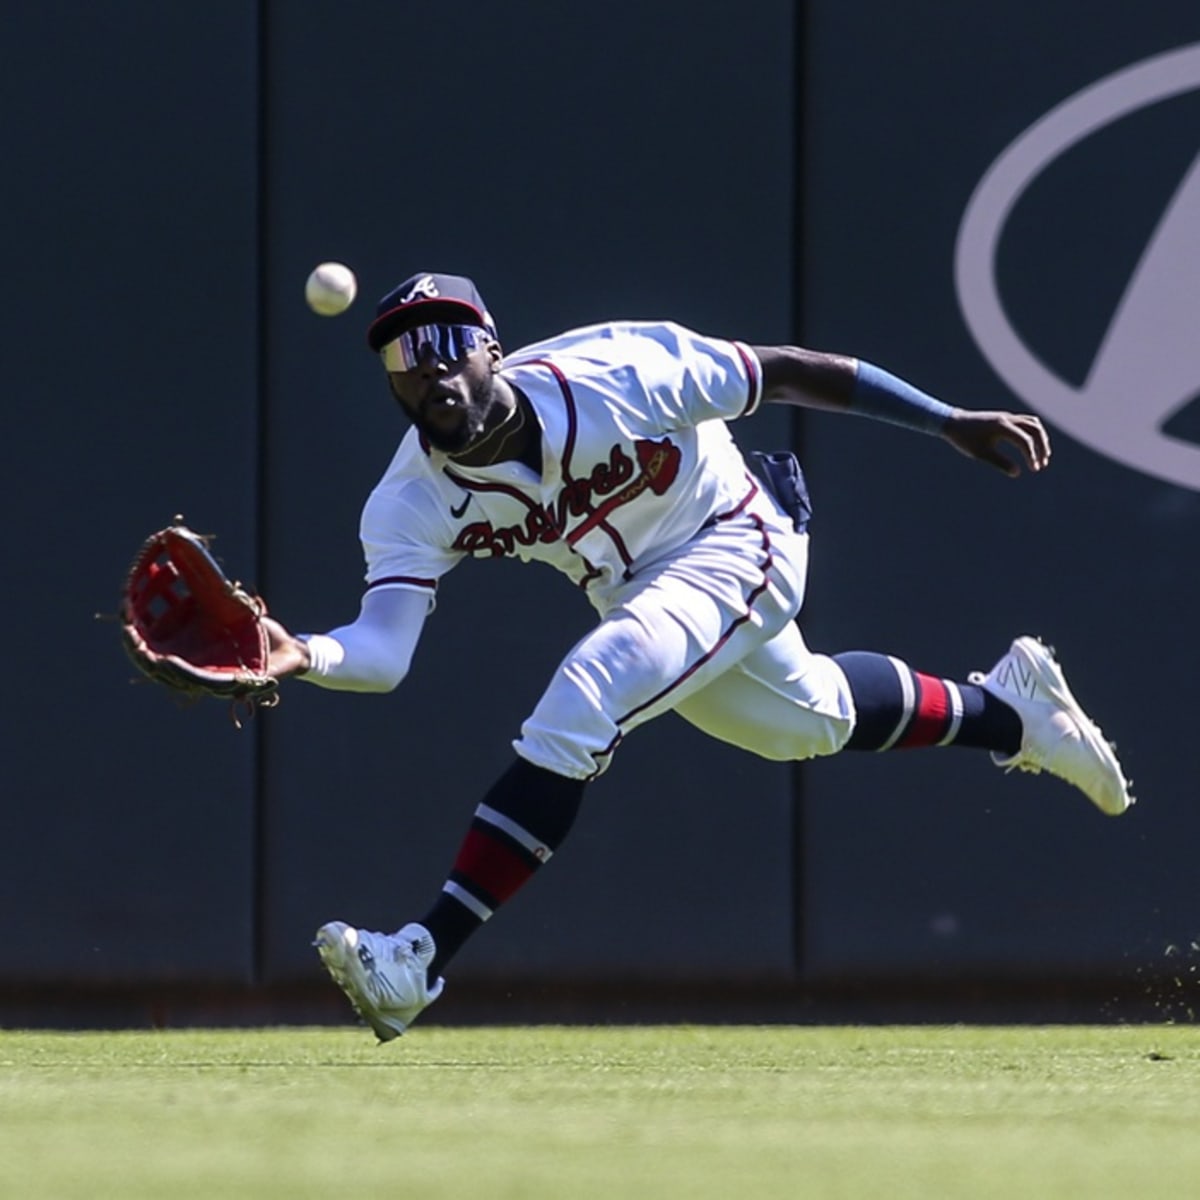 NL Rookie of the Year: Michael Harris II wins honors over Braves